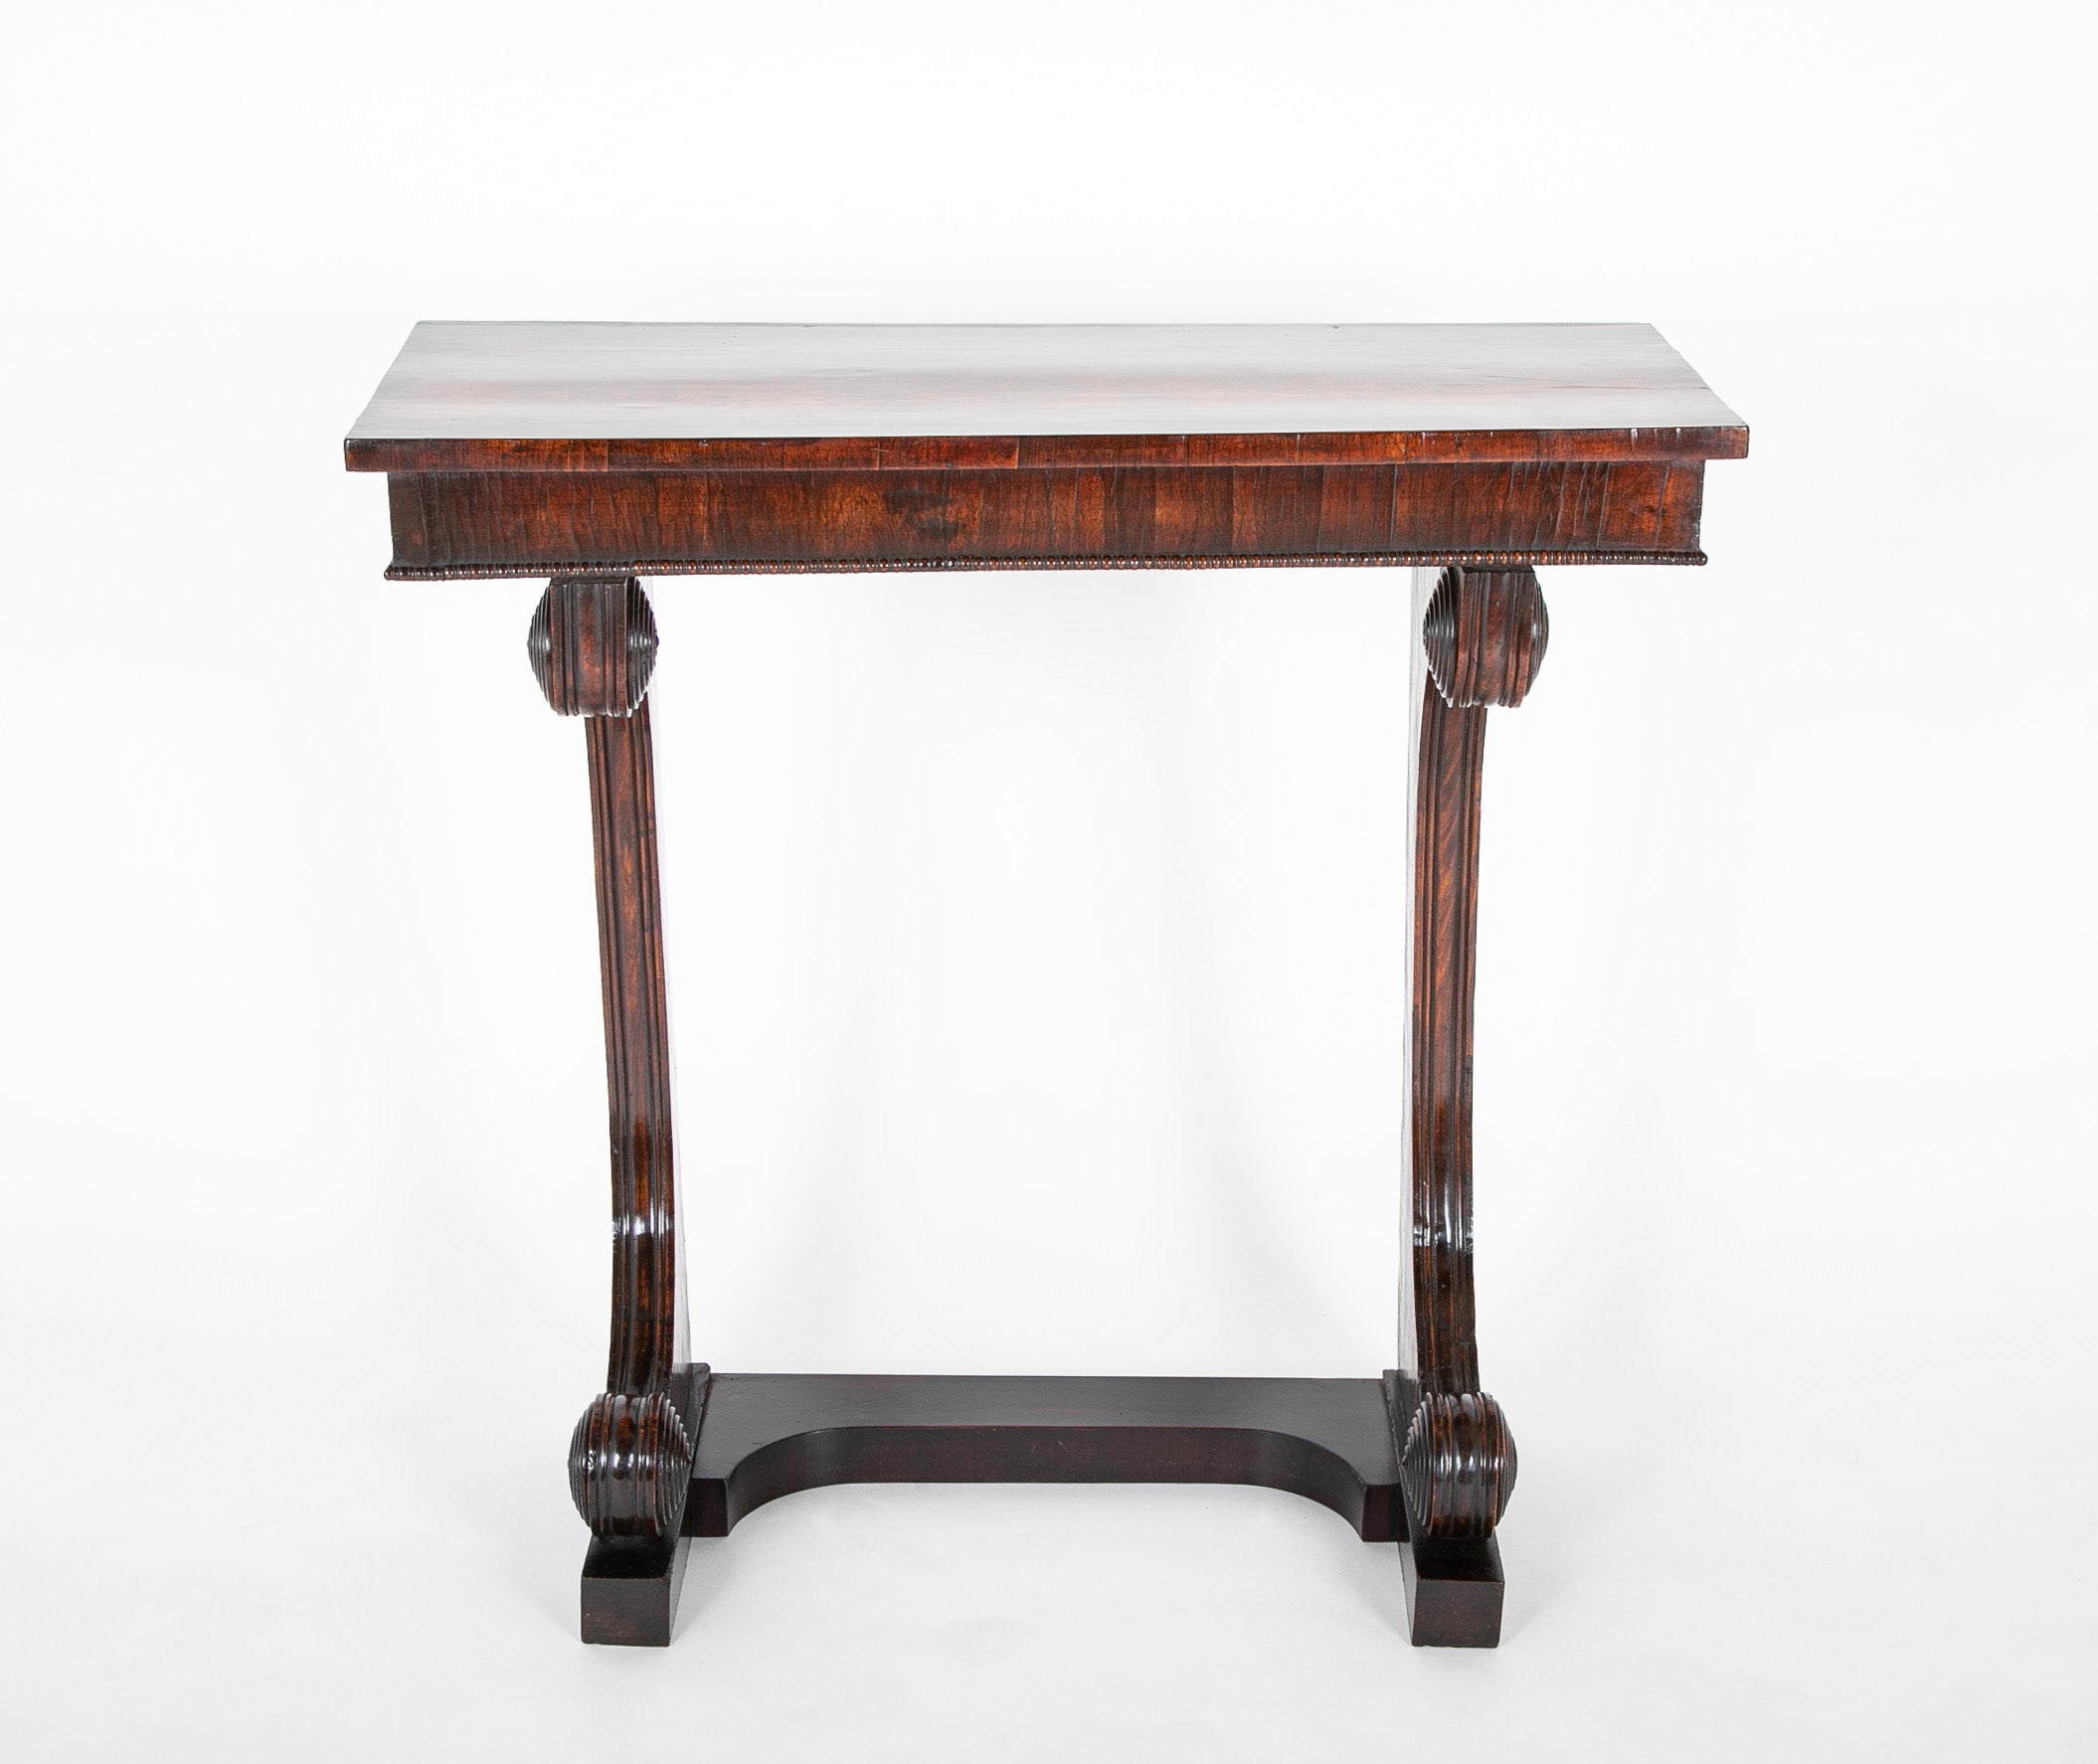 Pair of Late English William IV Carved Console Tables